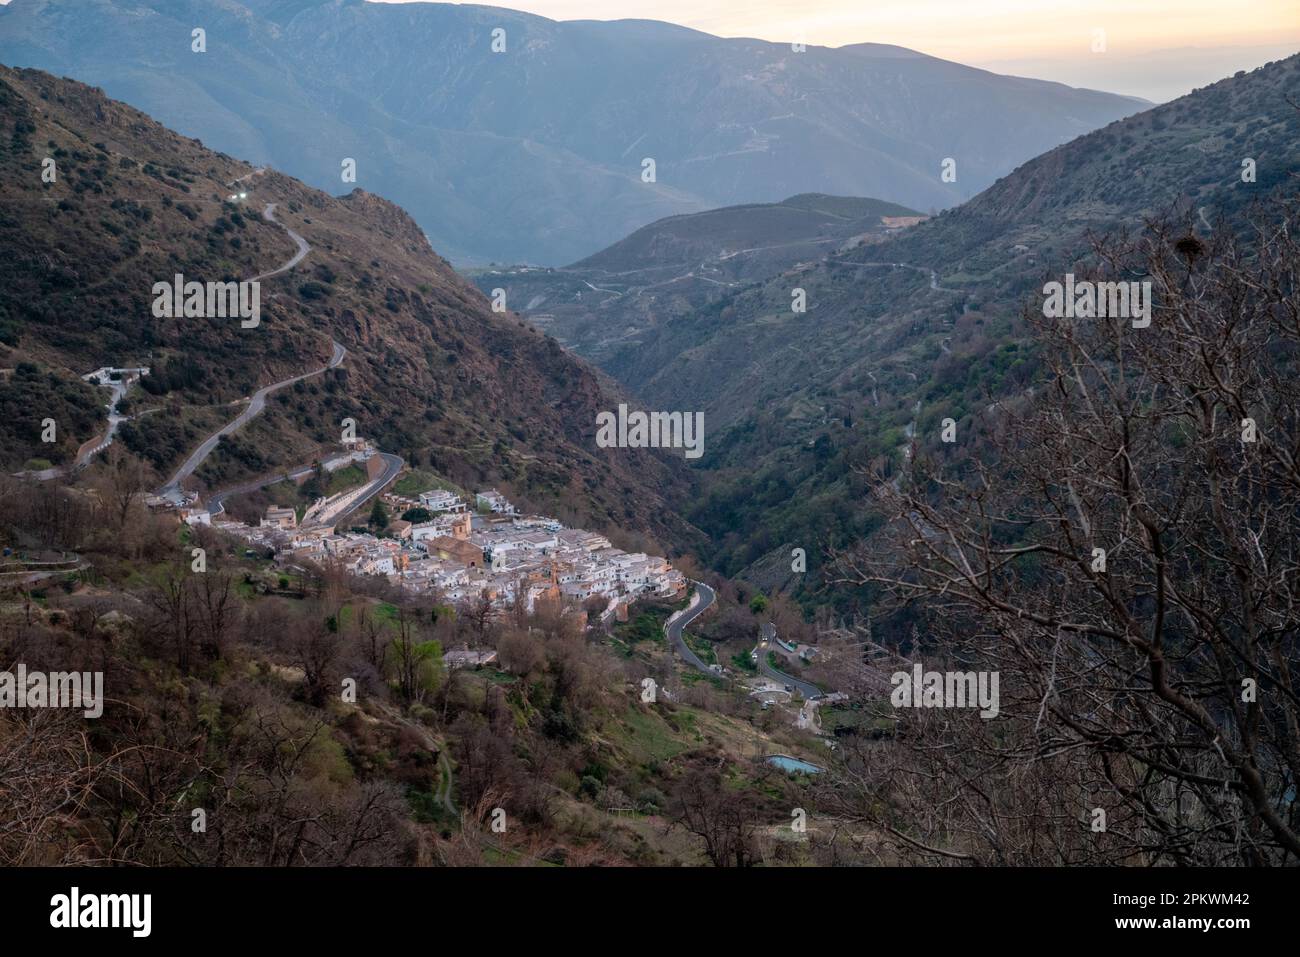 Views of the village of Pampaneira in the hills of southern Spain, nestling close to the Sierra Nevada. Pic taken from neighbouring village of Bubión. Stock Photo